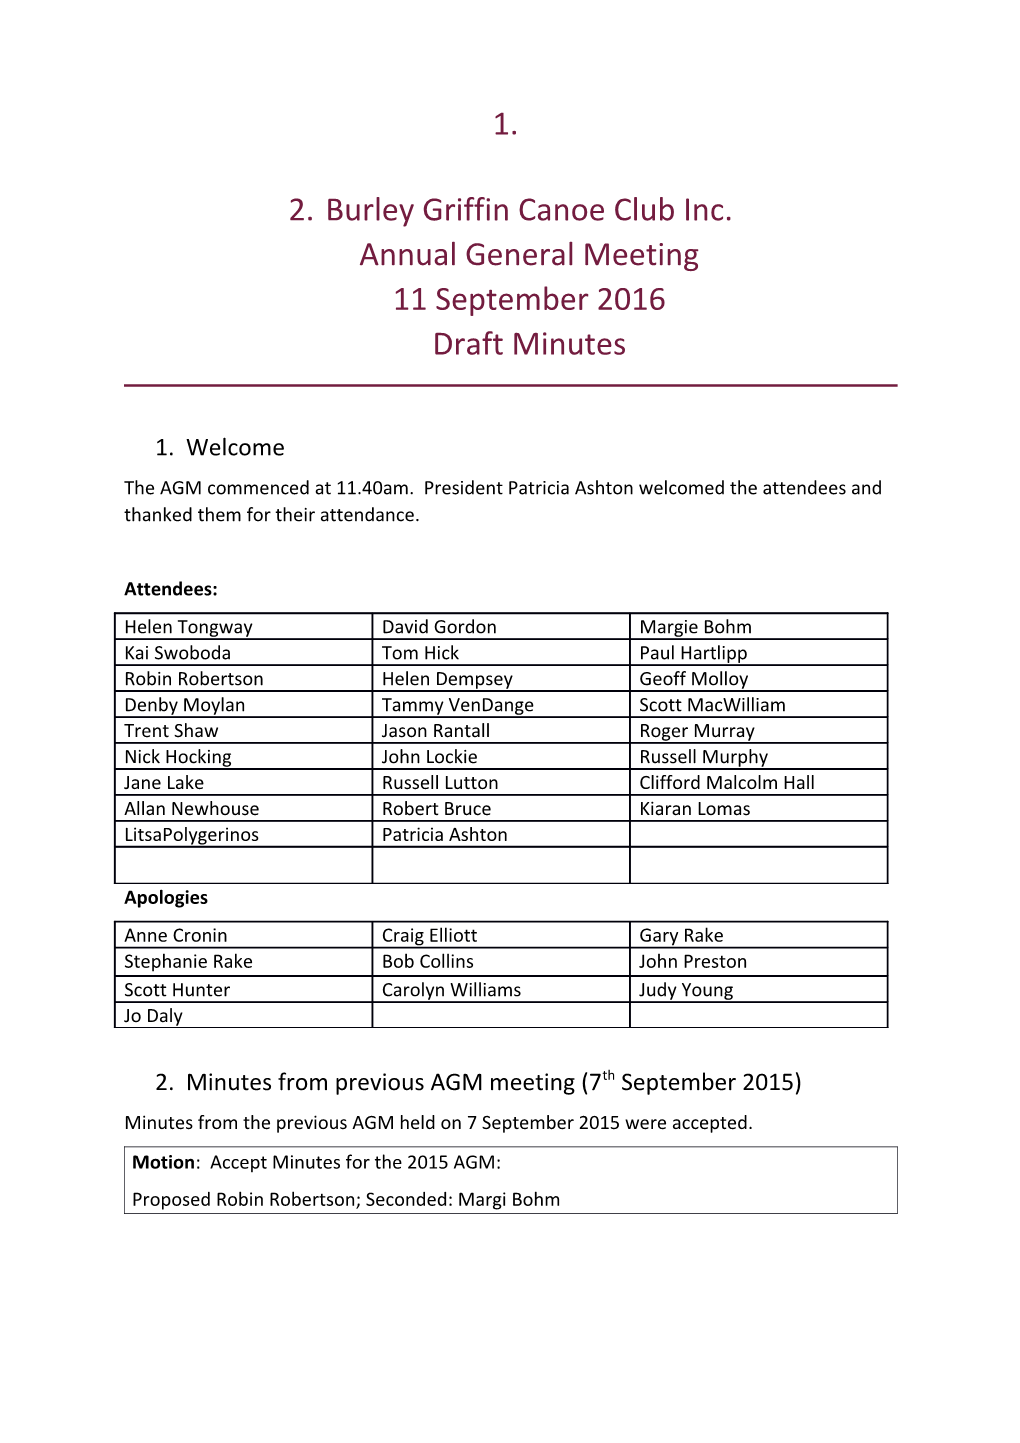 Burley Griffin Canoe Club Inc.Annual General Meeting11 September 2016Draft Minutes